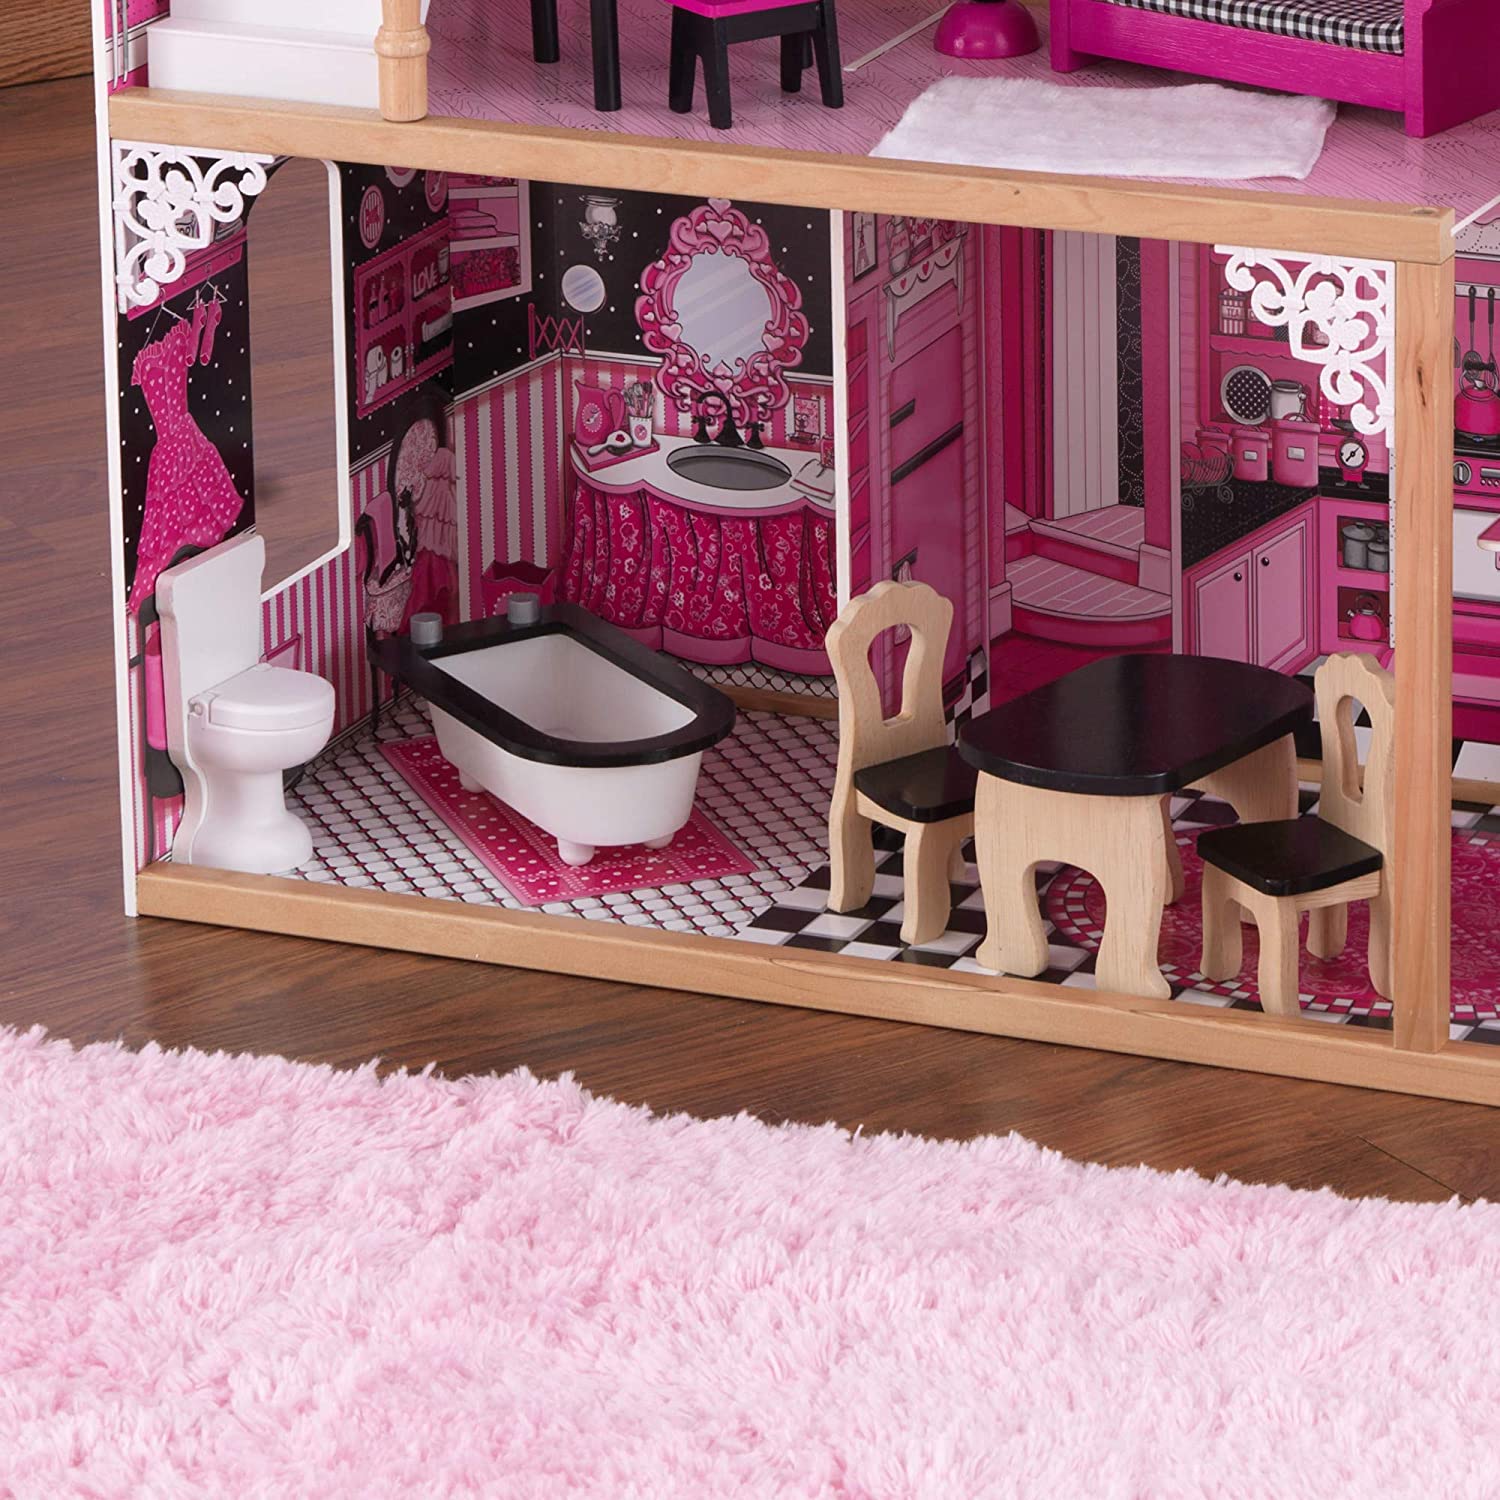 Dollhouse With Furniture For Kids (Model 6